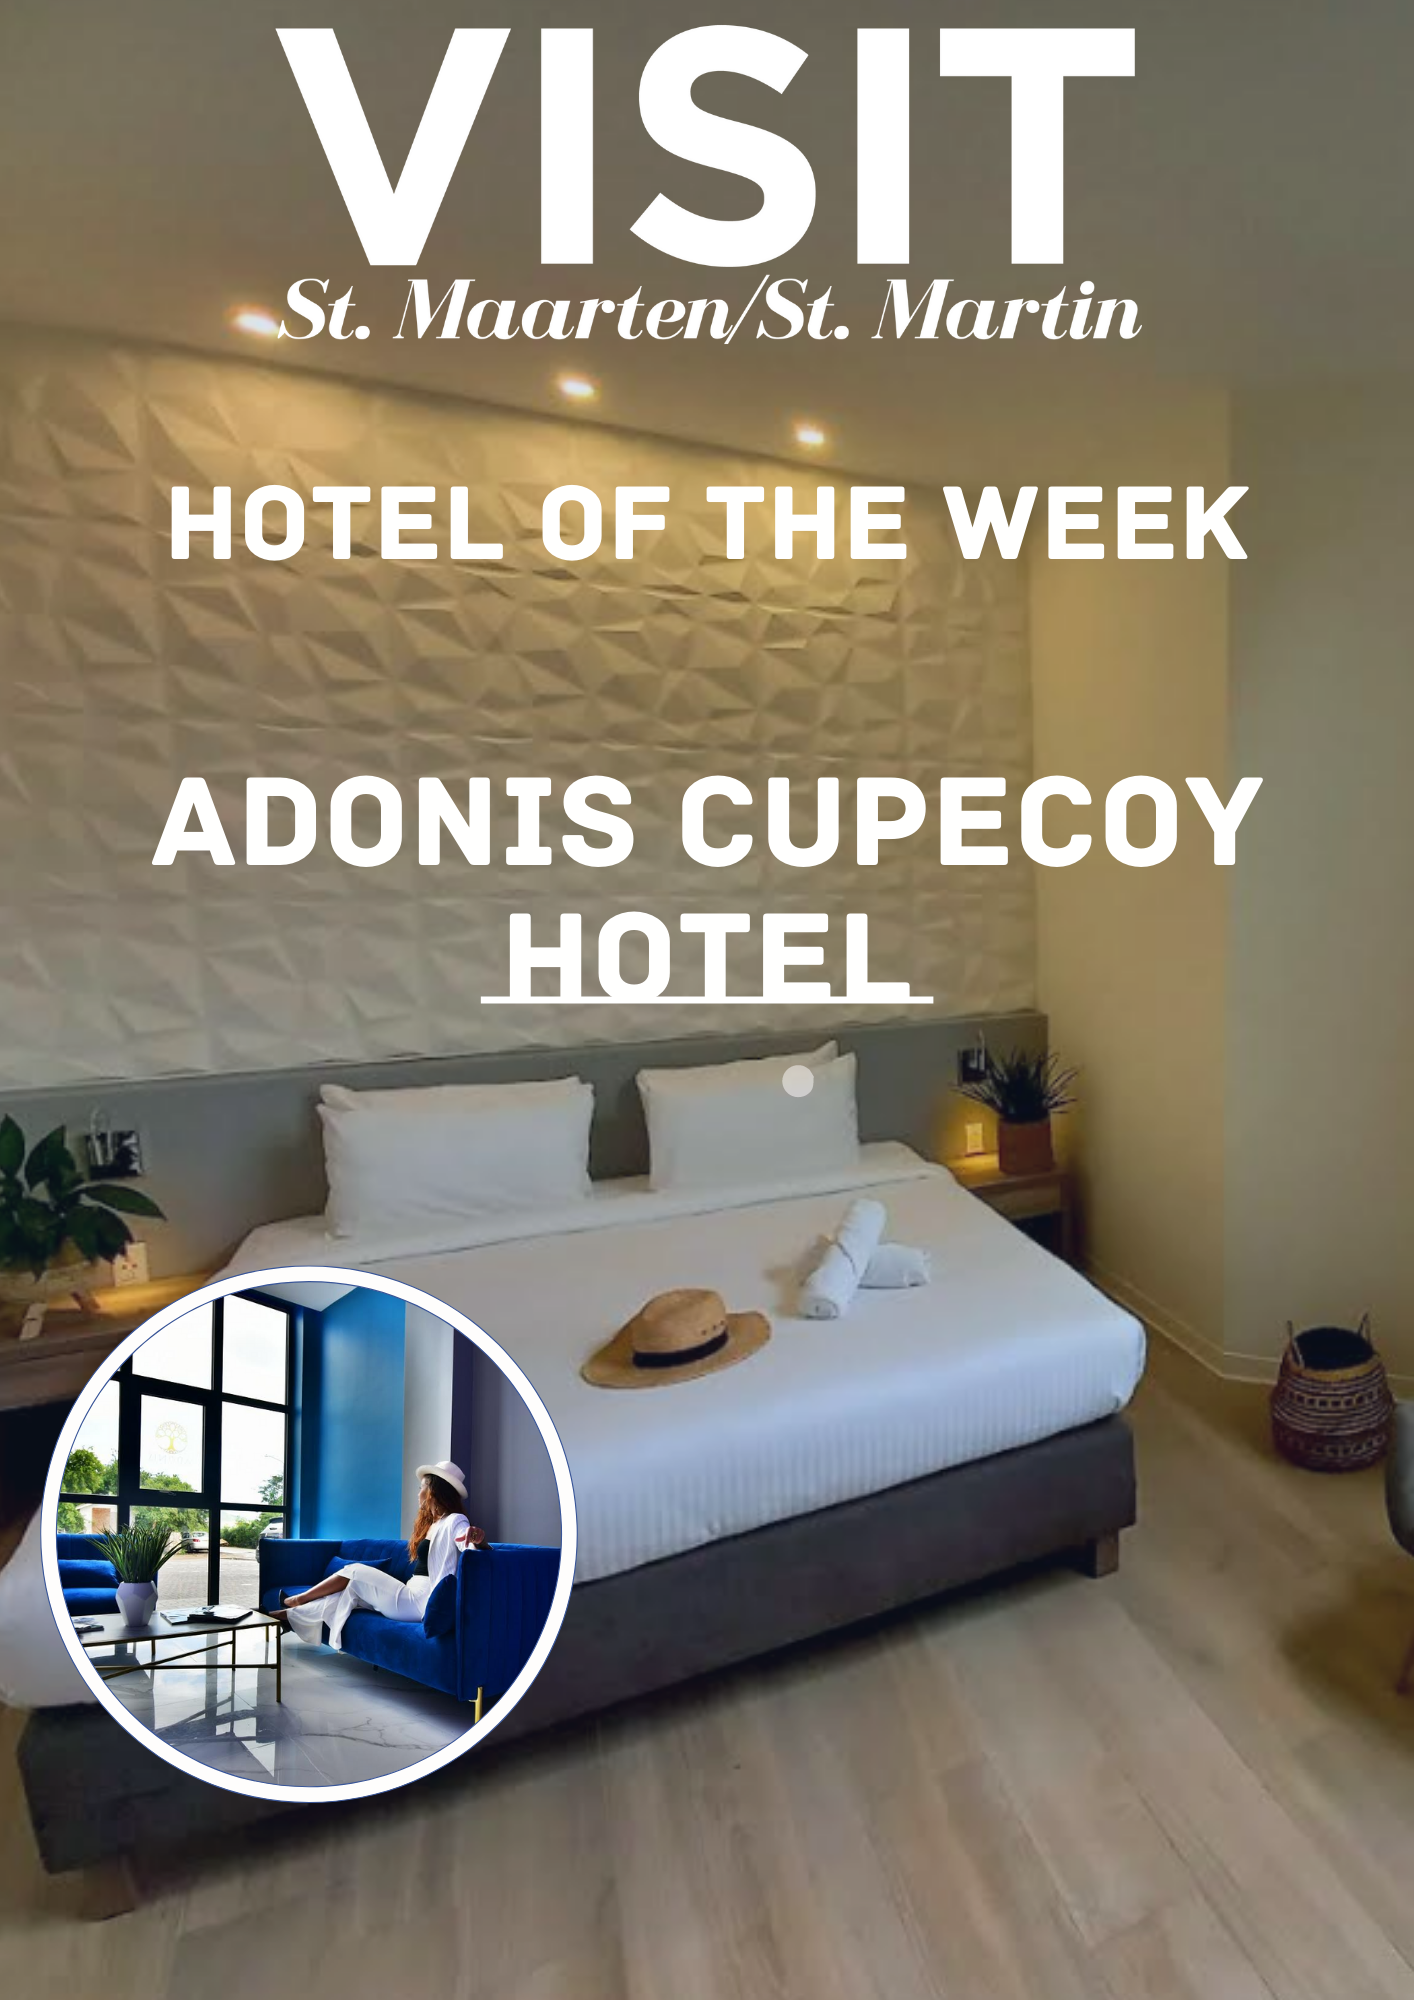 Adonis Cupecoy Hotel for hotel of the week